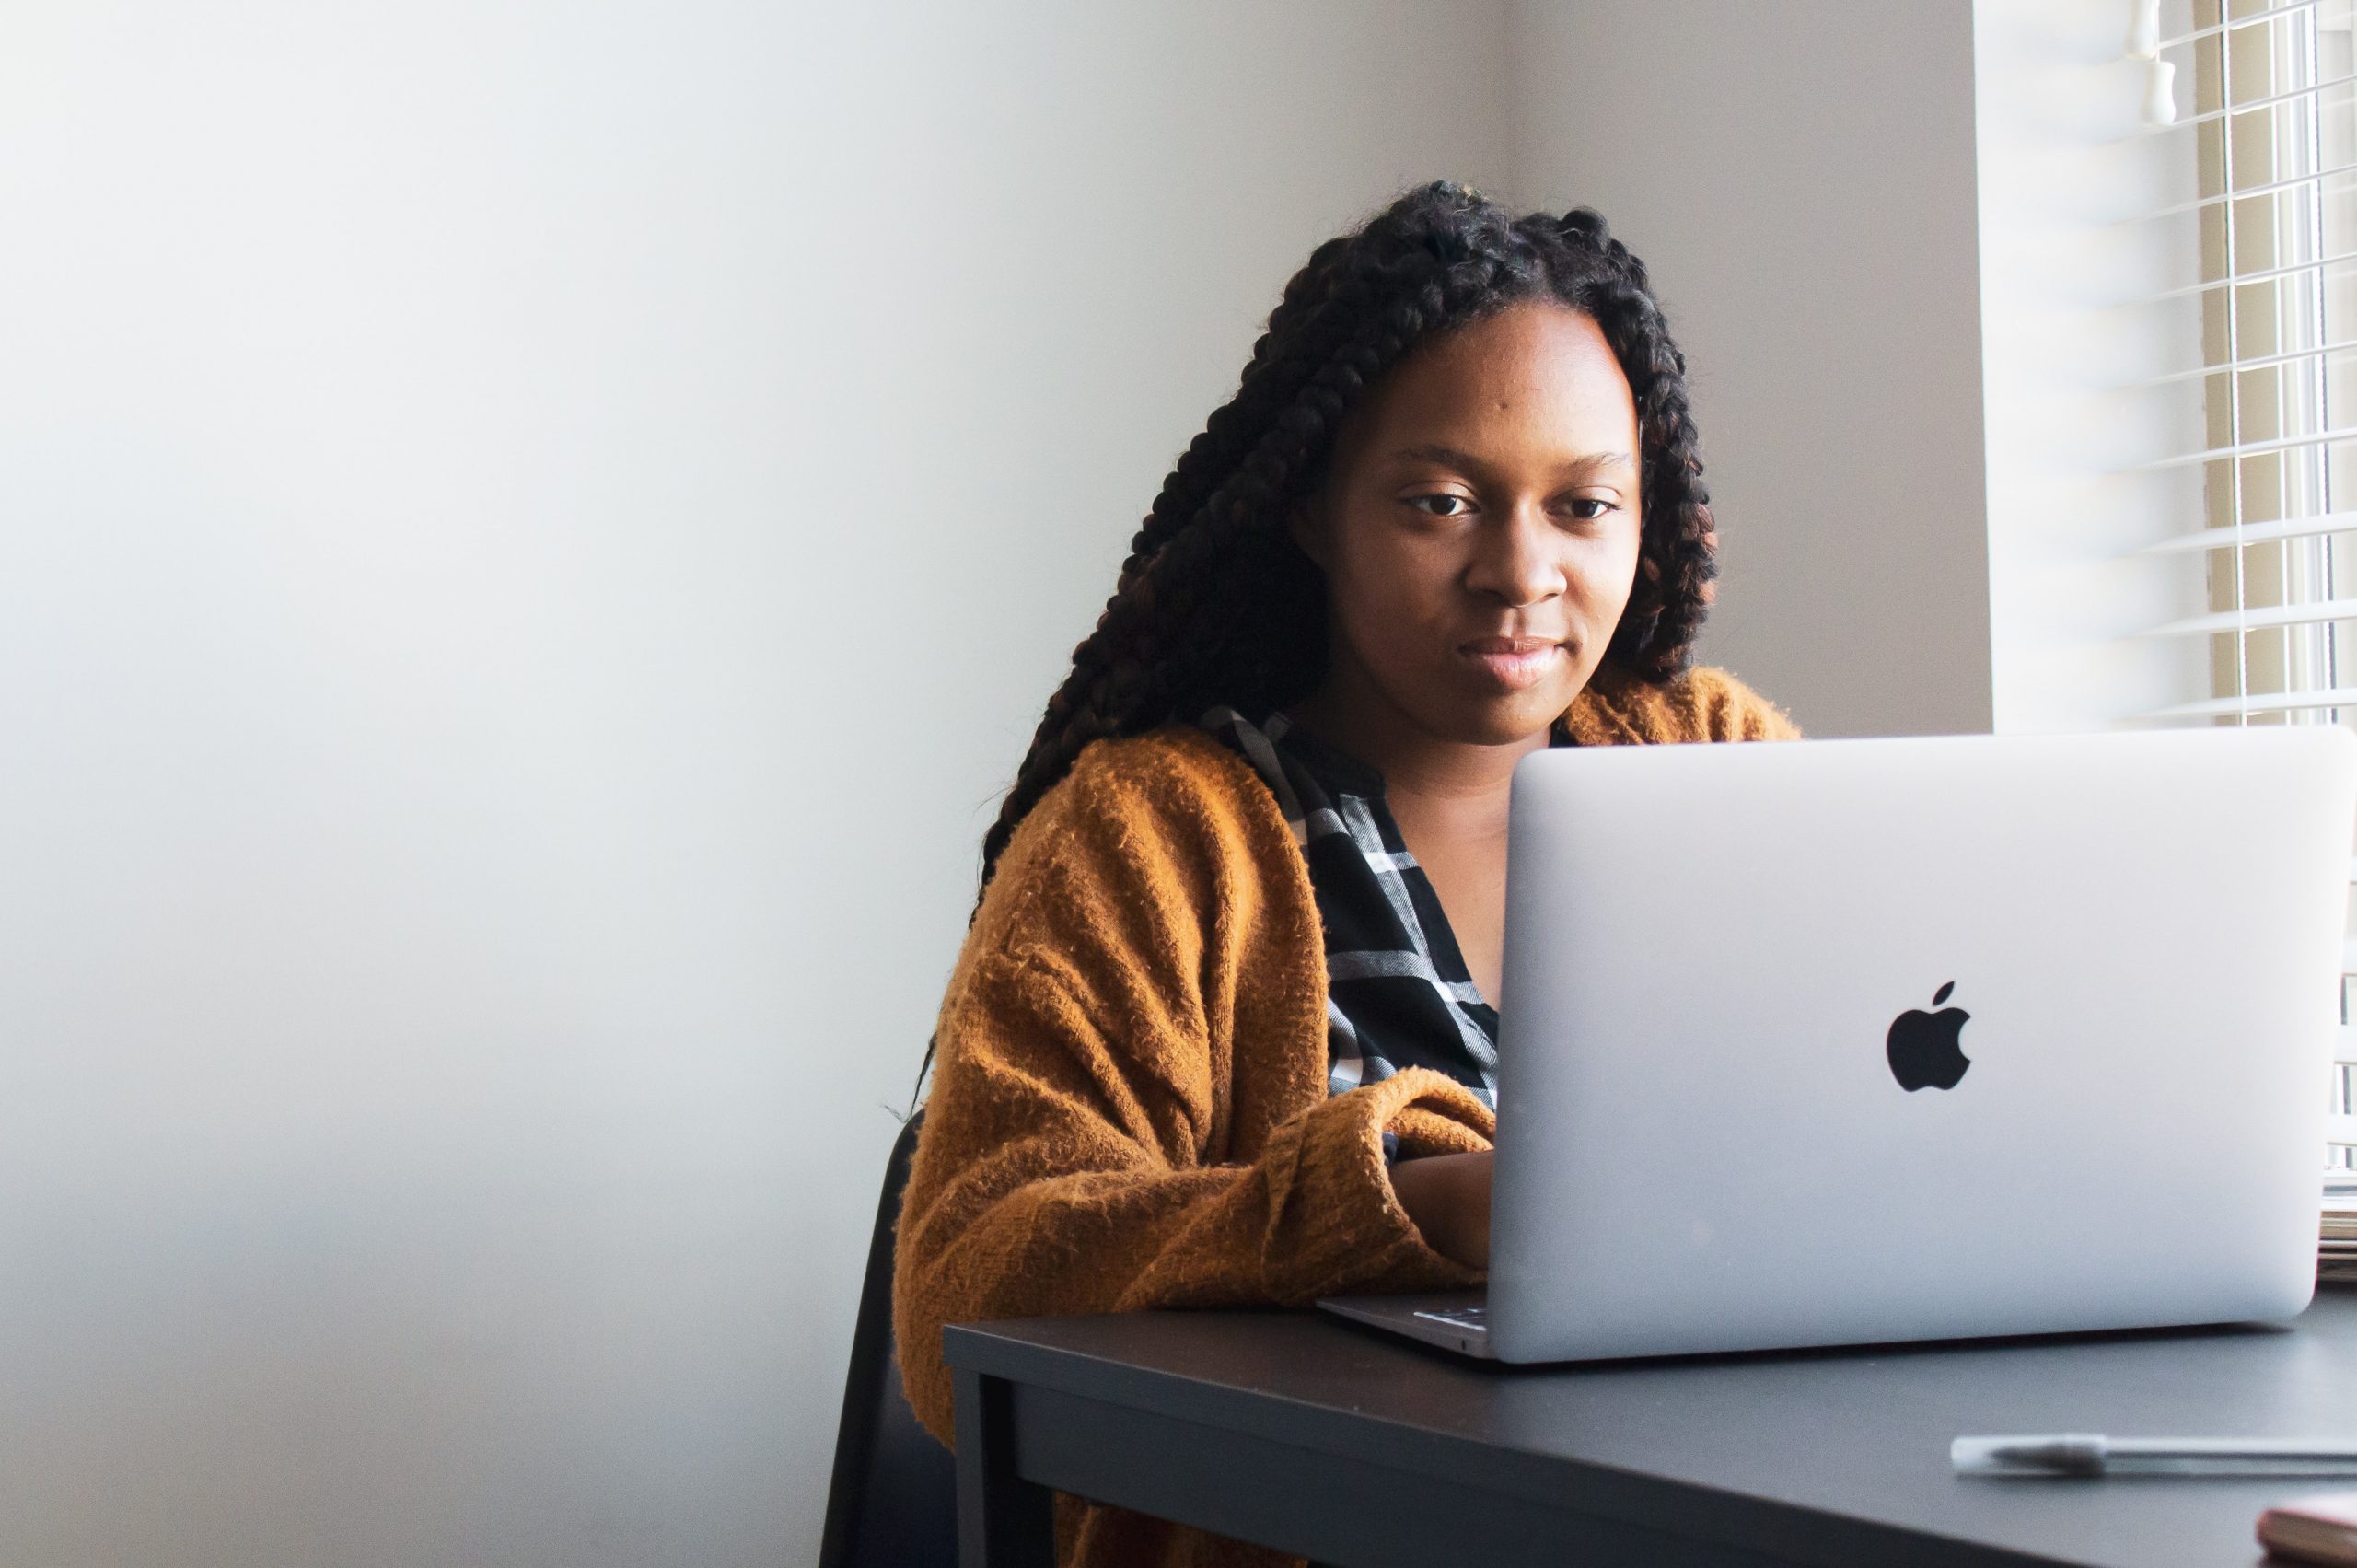 A Black woman with dreads sits at a desk and writers on a MacBook. She is wearing a yellow cardigan.